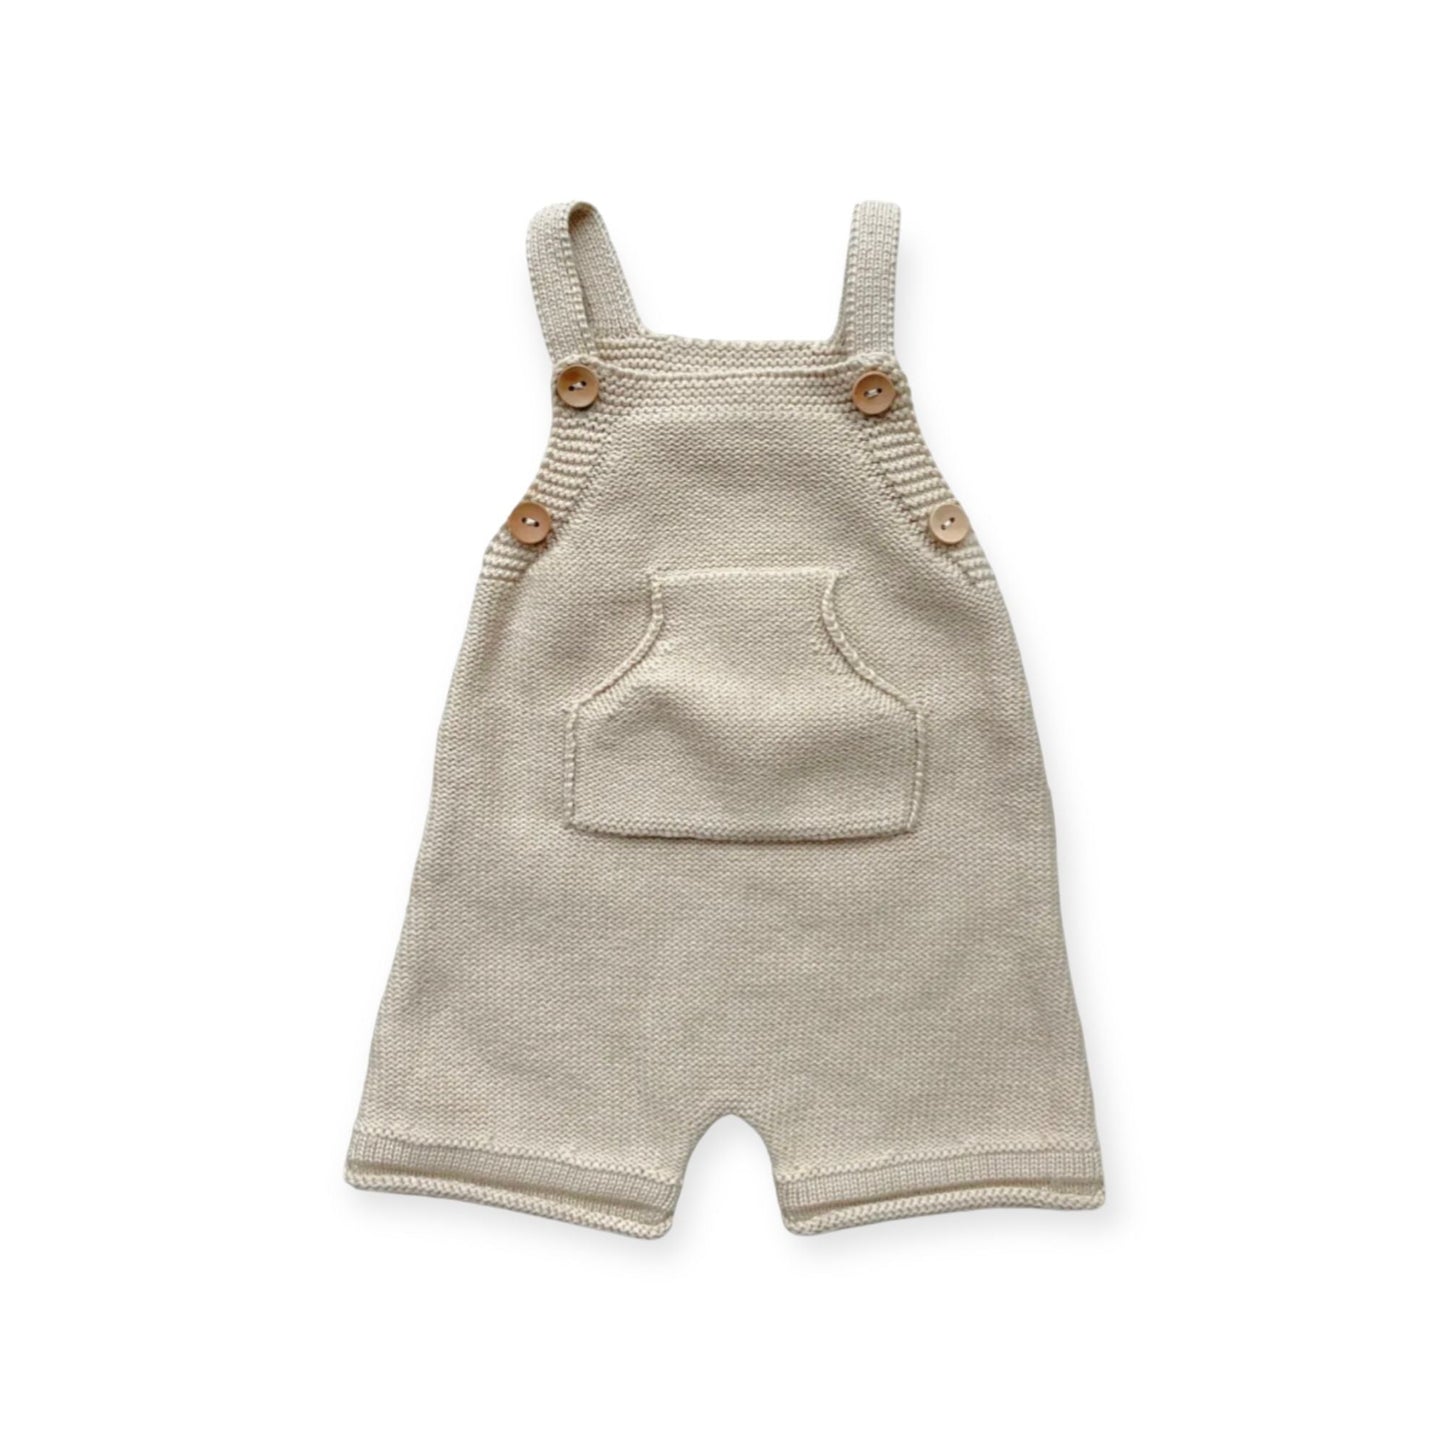 KNIT Dungarees "Sand" - Siliblu Boutique & Atelier